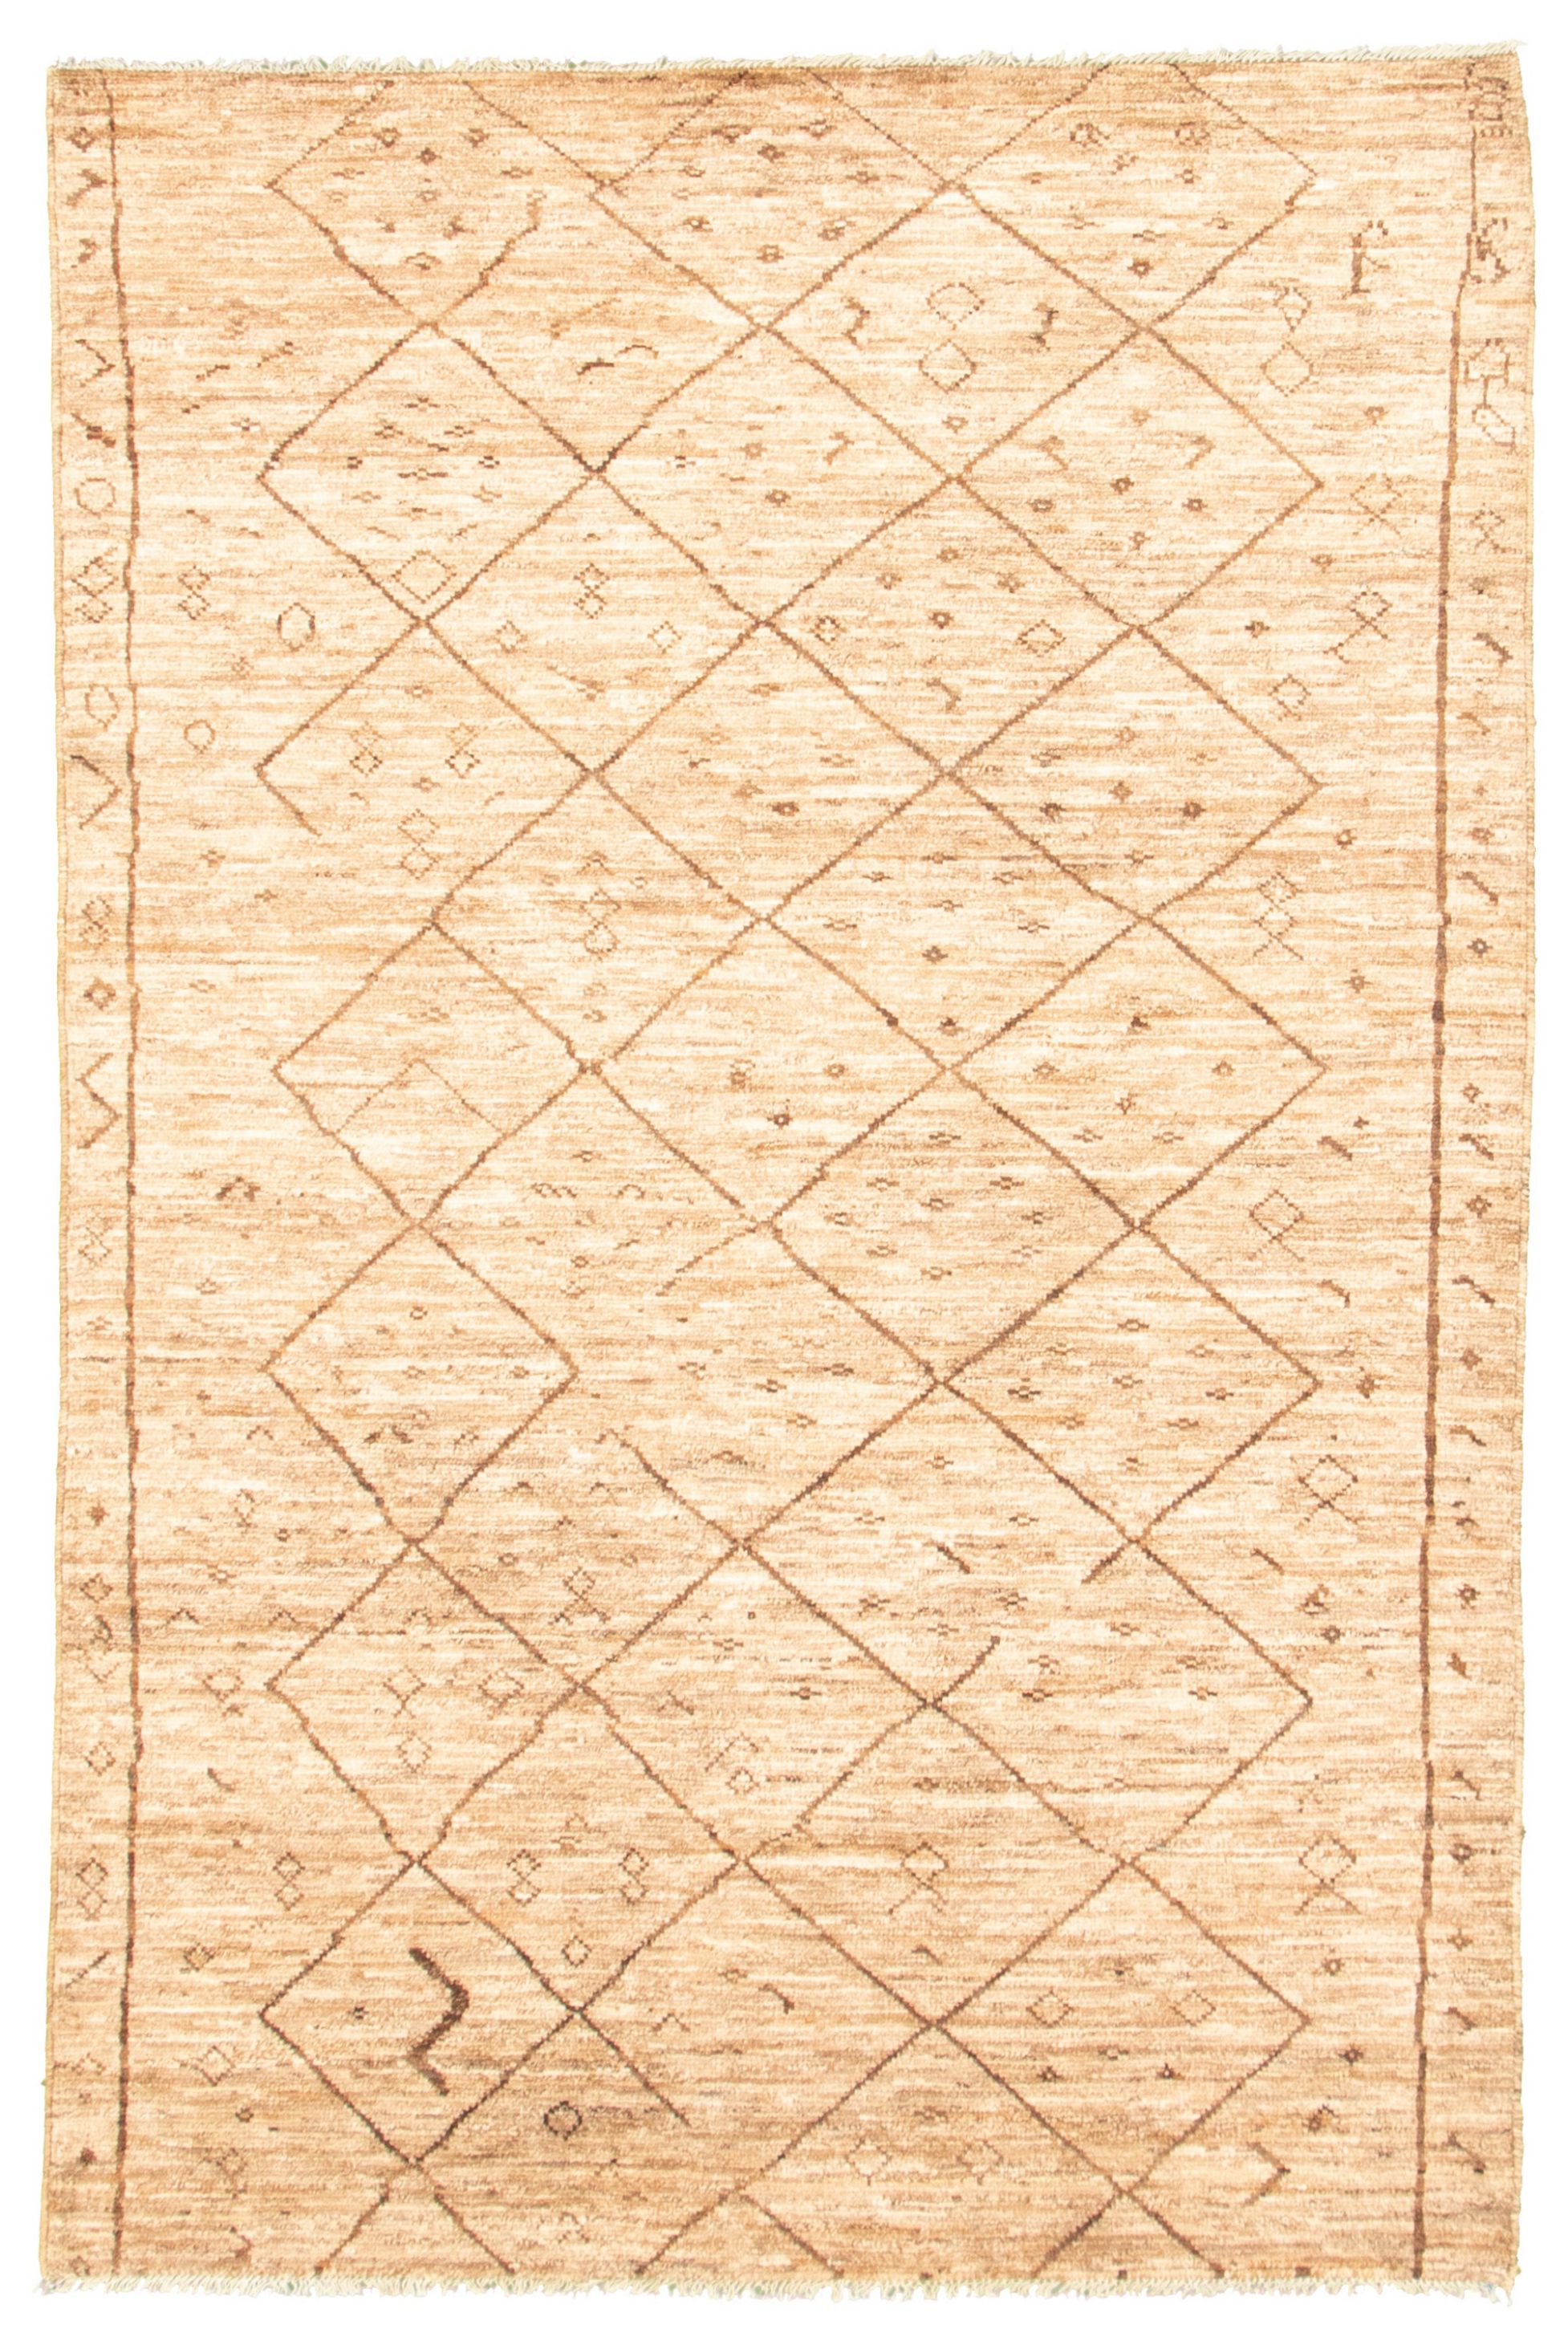 Hand-knotted Marrakech Tan Wool Rug 5'1" x 7'10" Size: 5'1" x 7'10"  